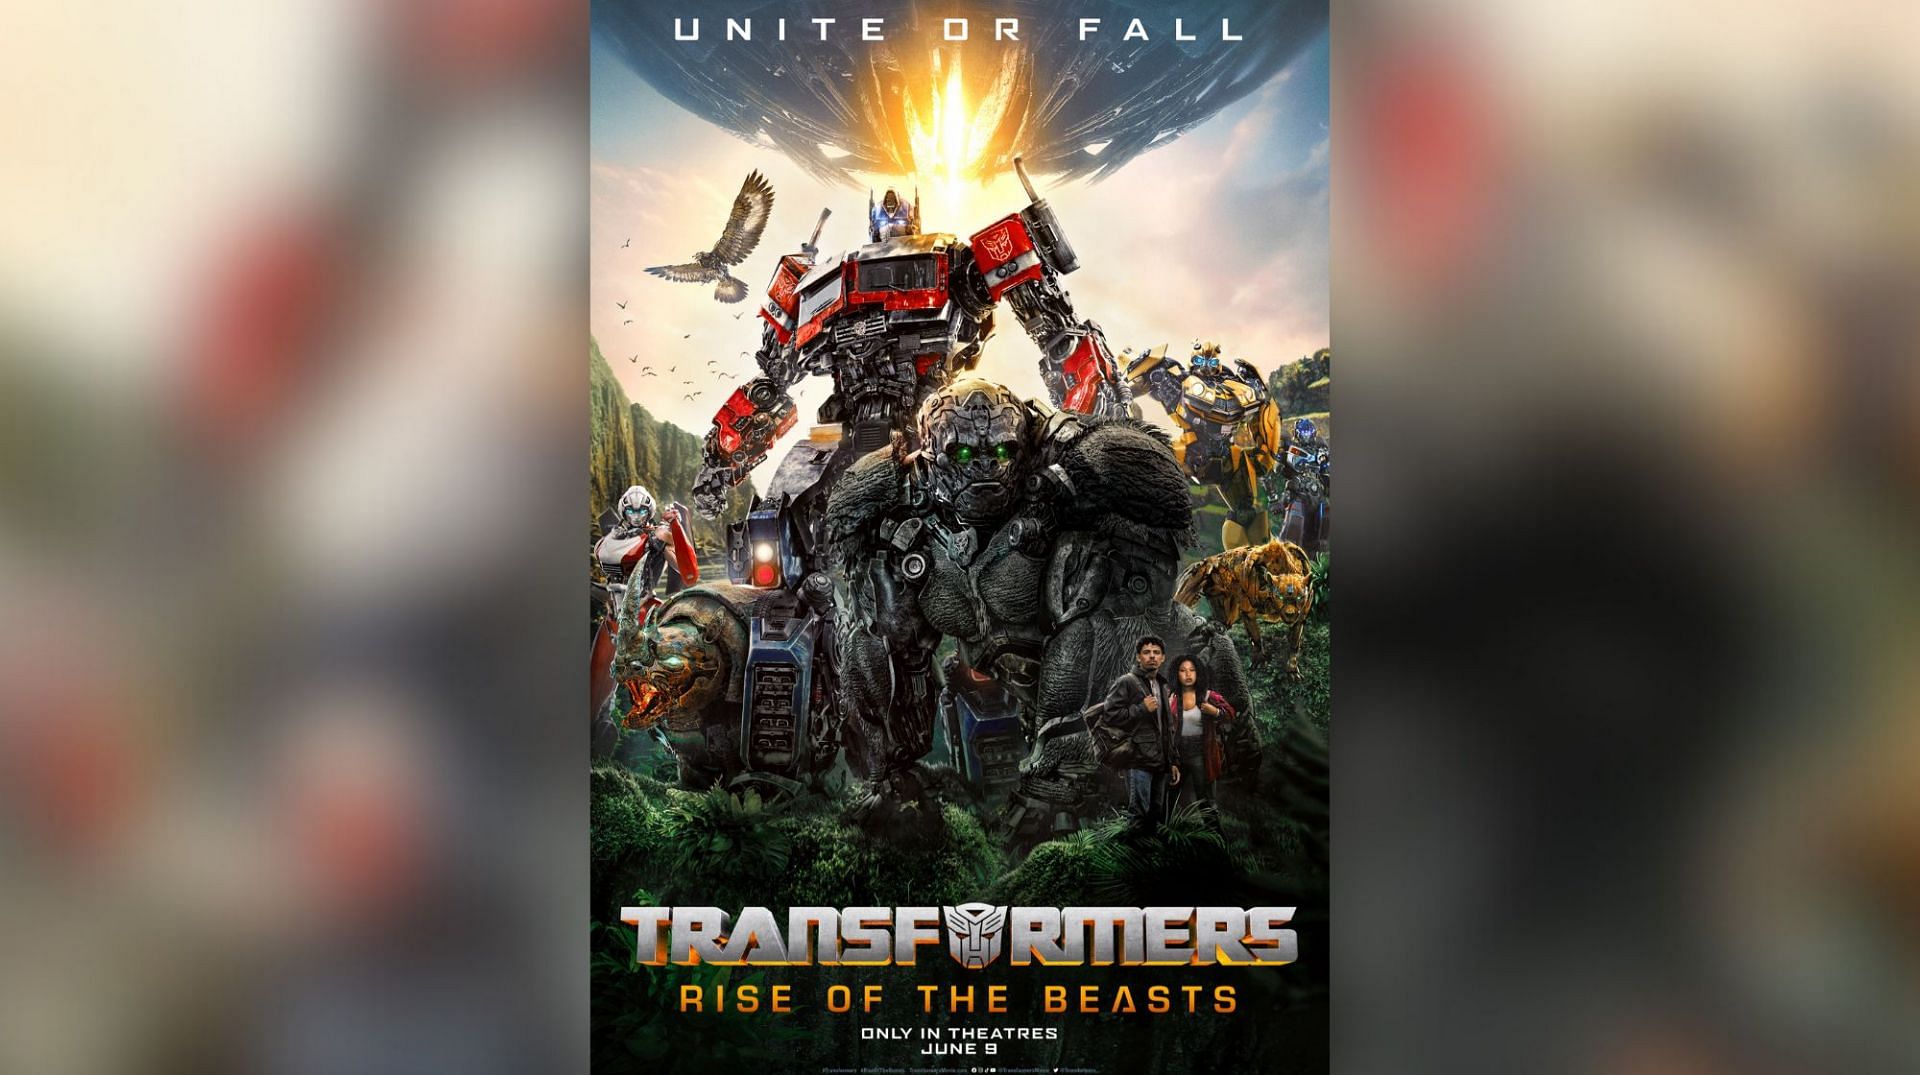 Transformers: Rise of the Beasts (Image via Paramount Pictures)